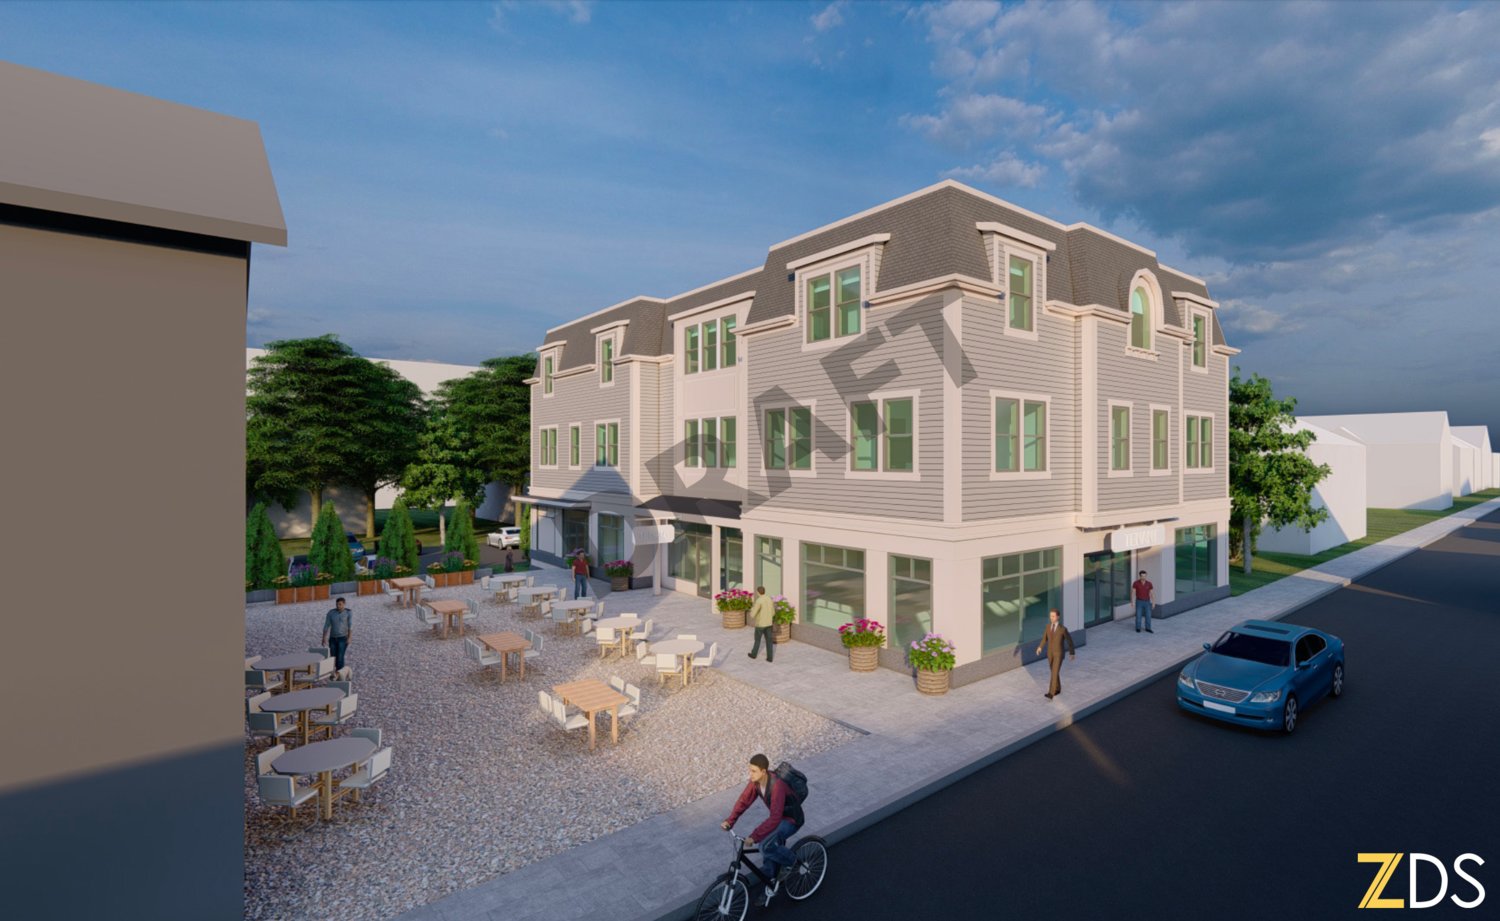 The proposed three-story development at 119 Water St. still includes only 3 of the 12 units as affordable, per updated financial information submitted to the Warren Planning Board.